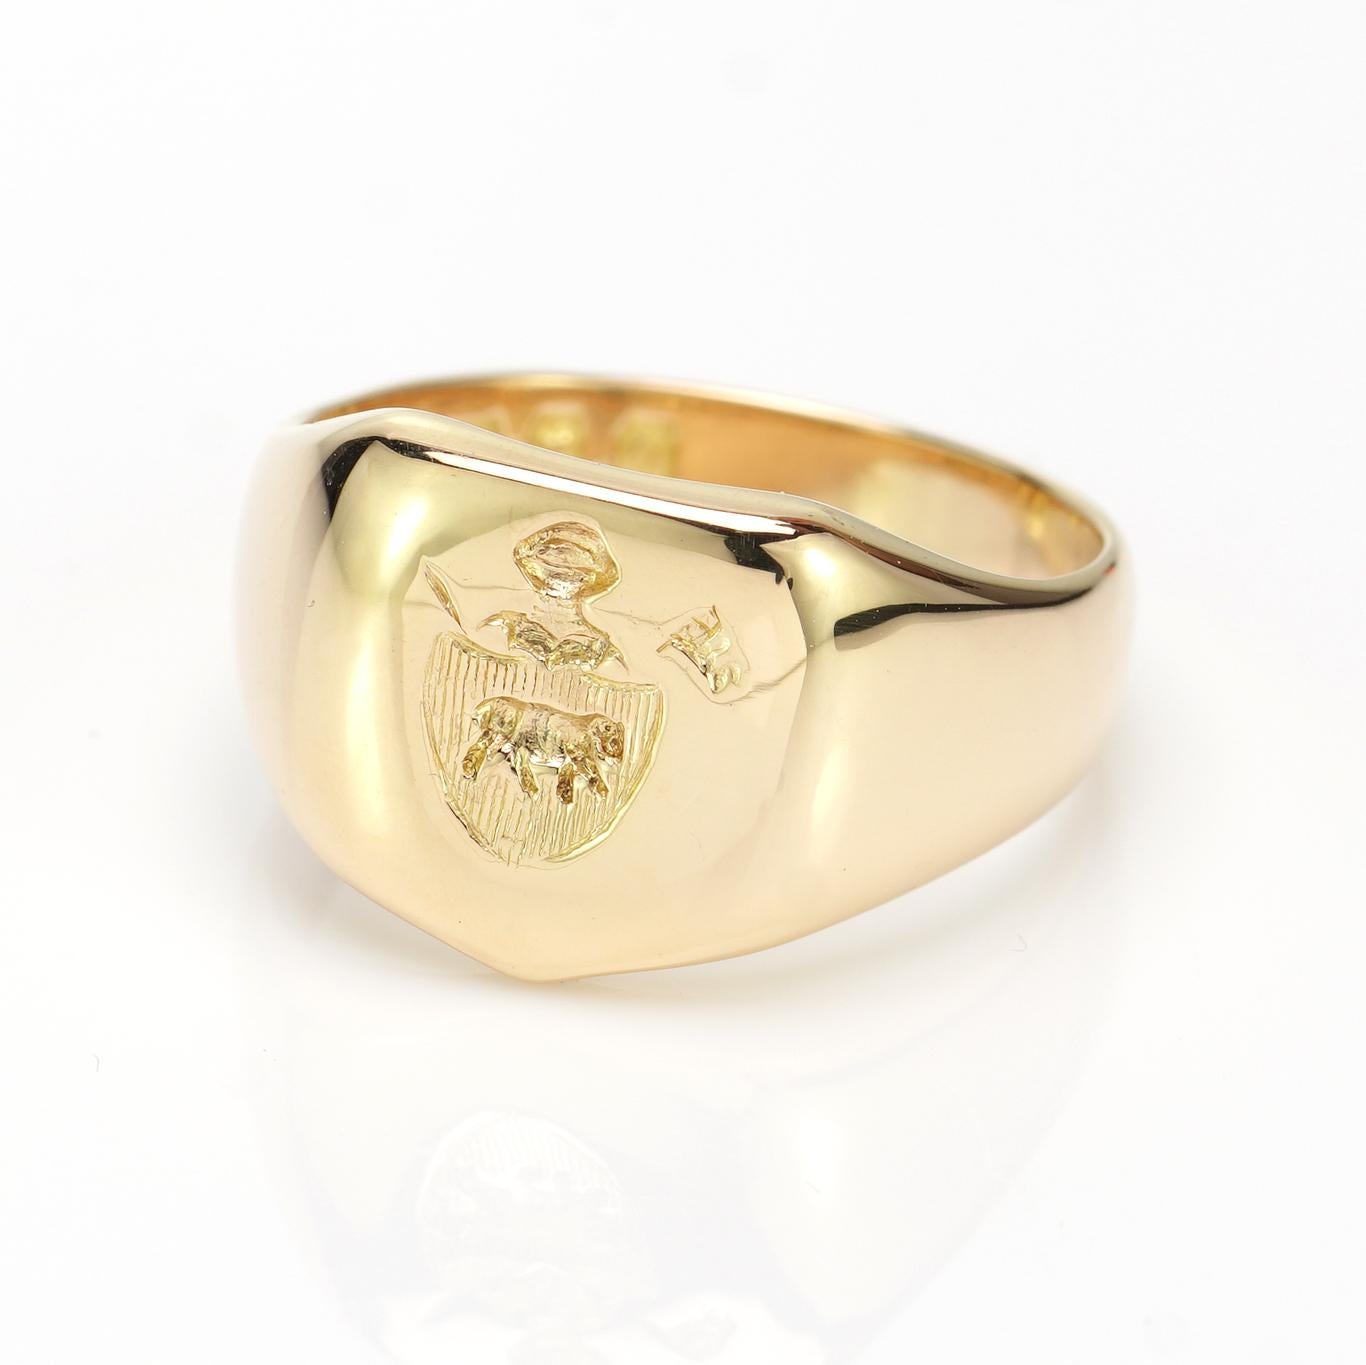 Vintage 18kt. Yellow Gold Signet Ring with Coat of Arms 5